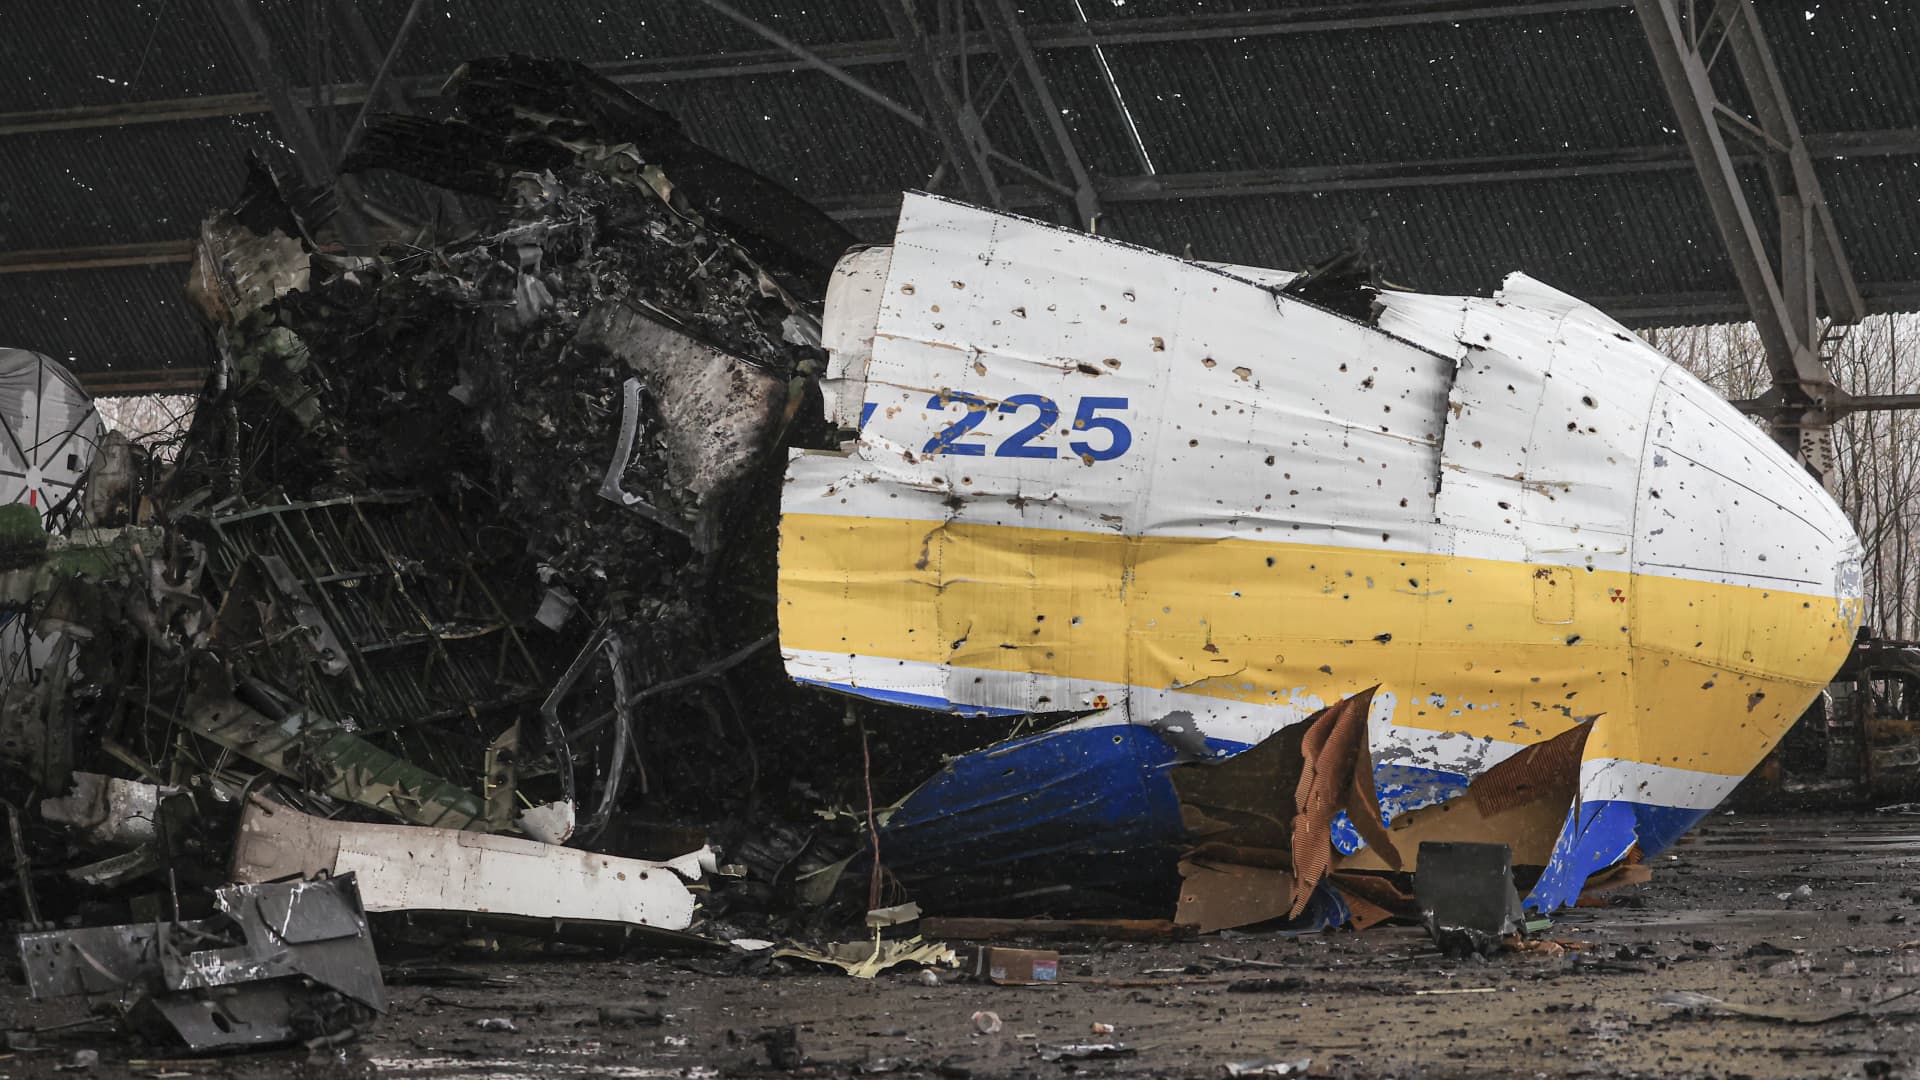 A view of the wreckage of Antonov An-225 Mriya cargo plane, the world's biggest aircraft, destroyed by Russian shelling as Russia's attack on Ukraine continues, at an airshed in Hostomel, Ukraine on April 03, 2022. 